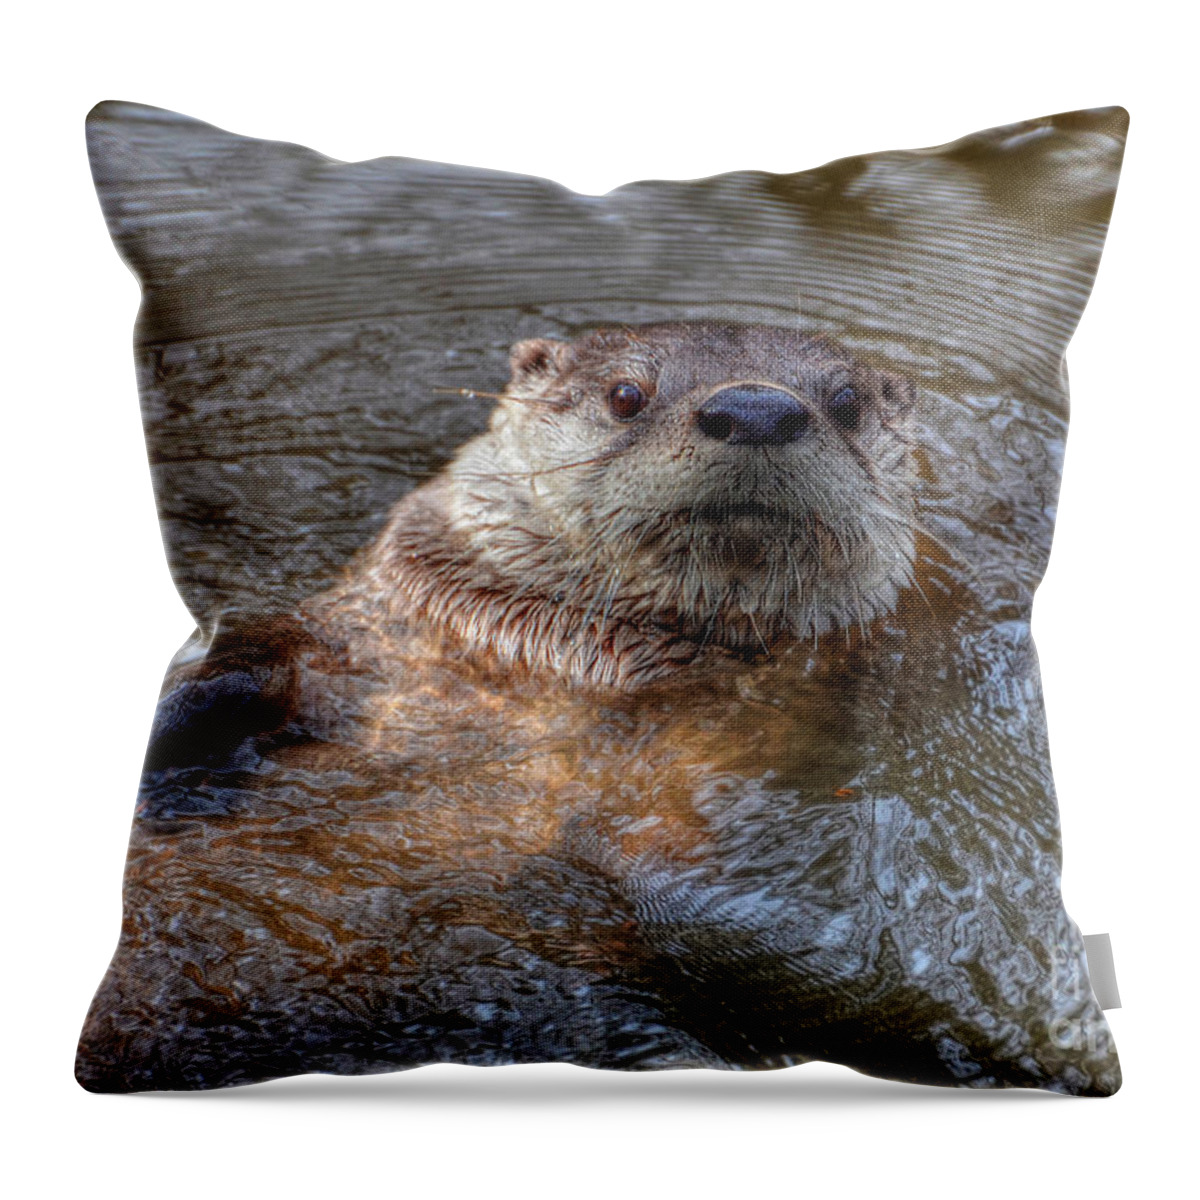 Otter Throw Pillow featuring the photograph River Otter by Kathy Baccari